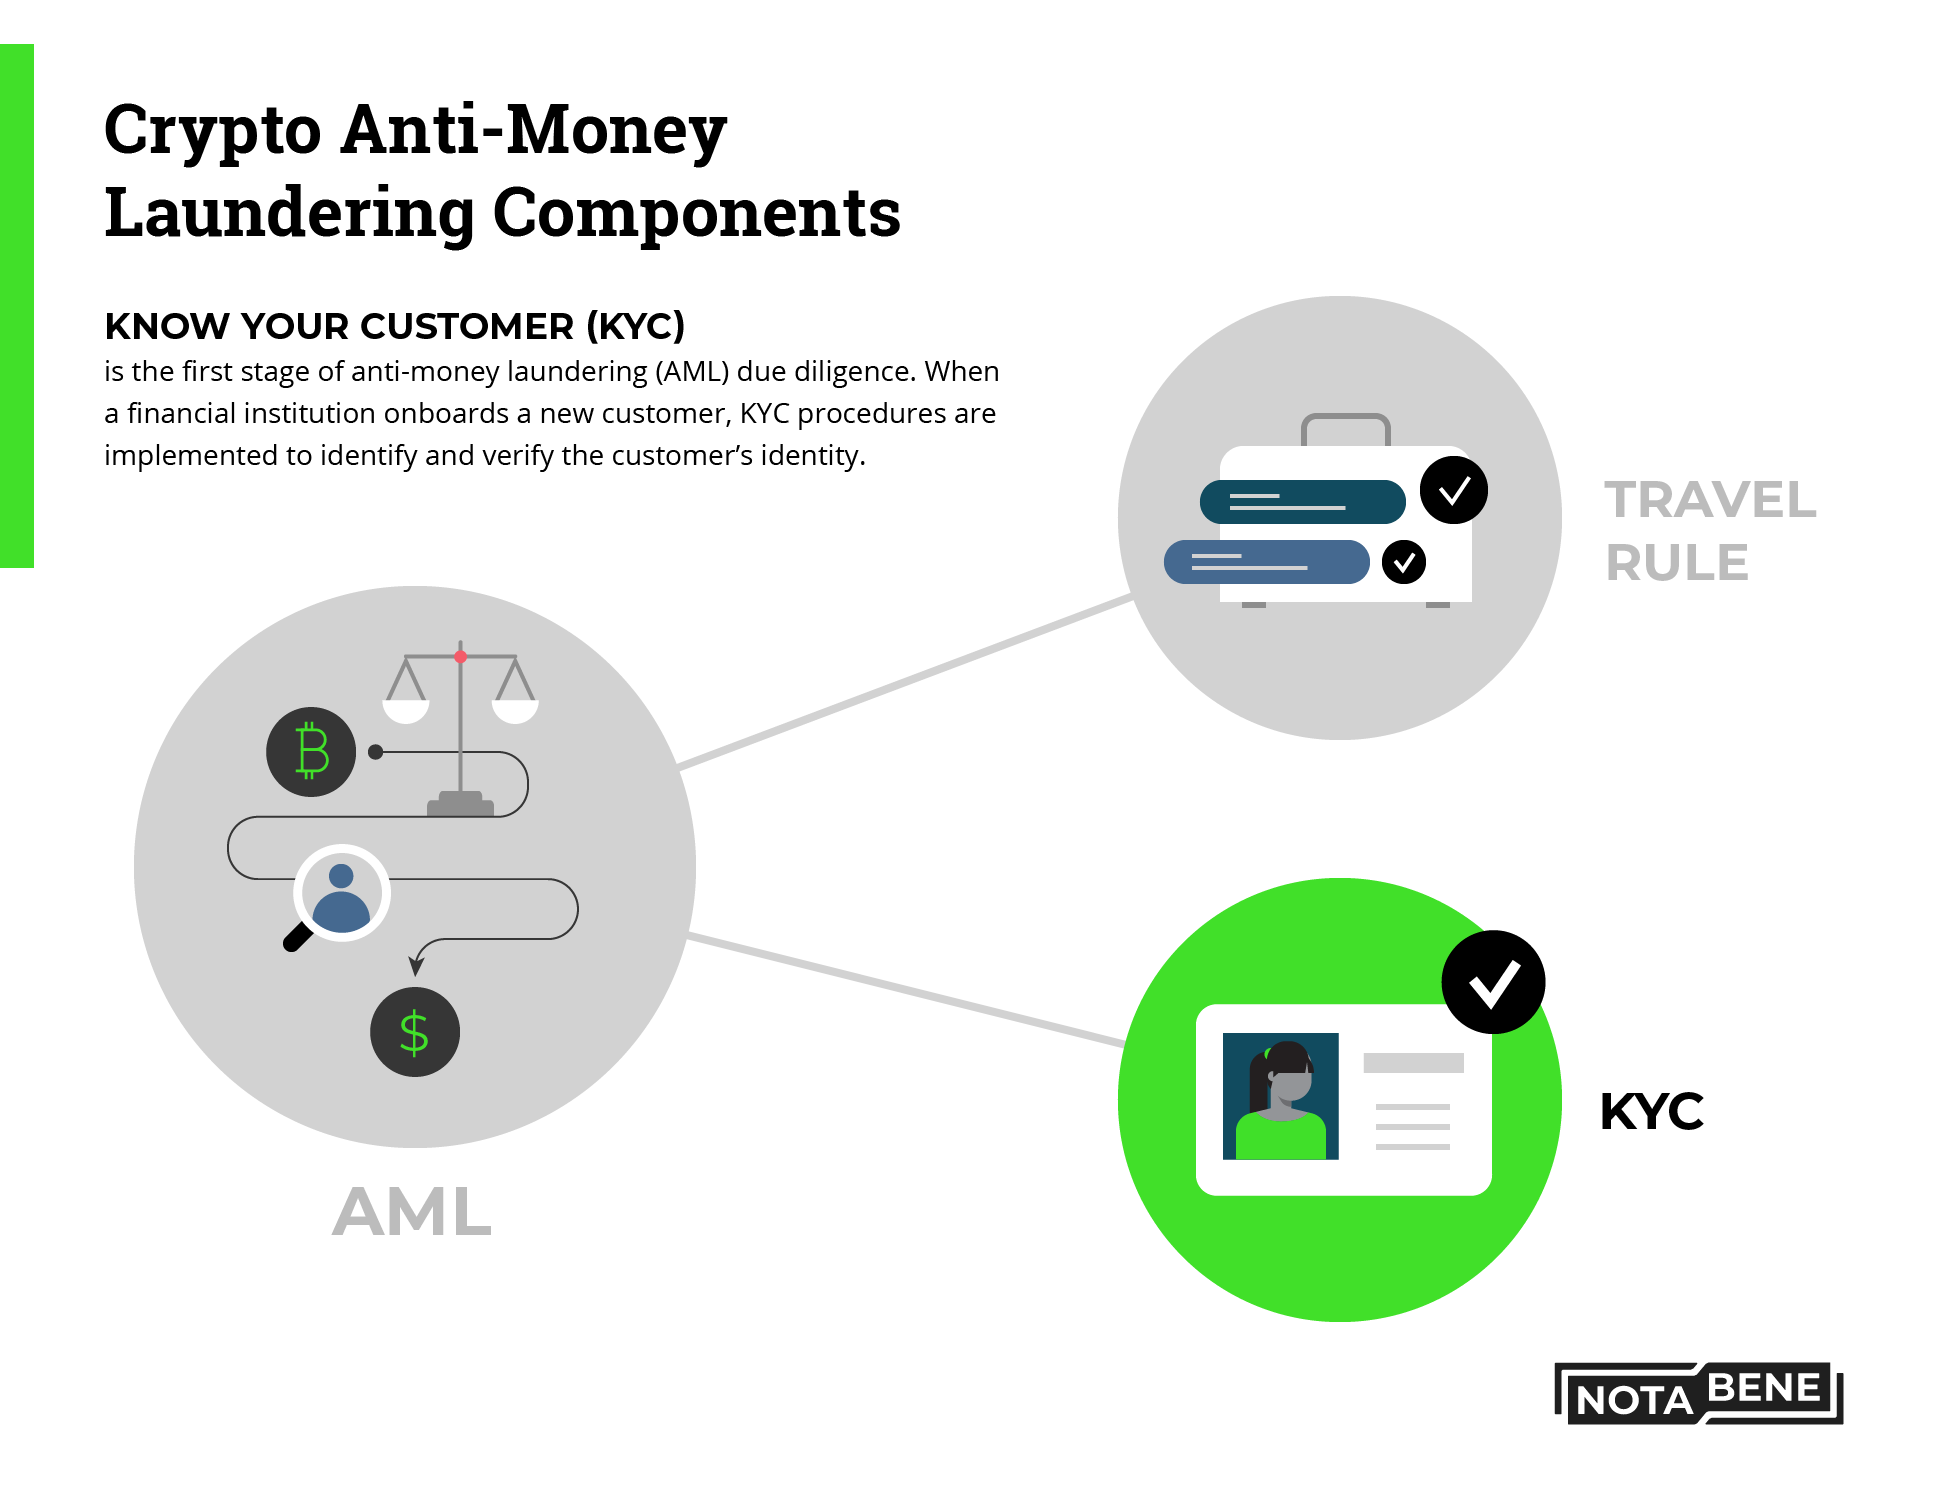 KYC in Crypto: A Guide to KYC for Crypto Startups